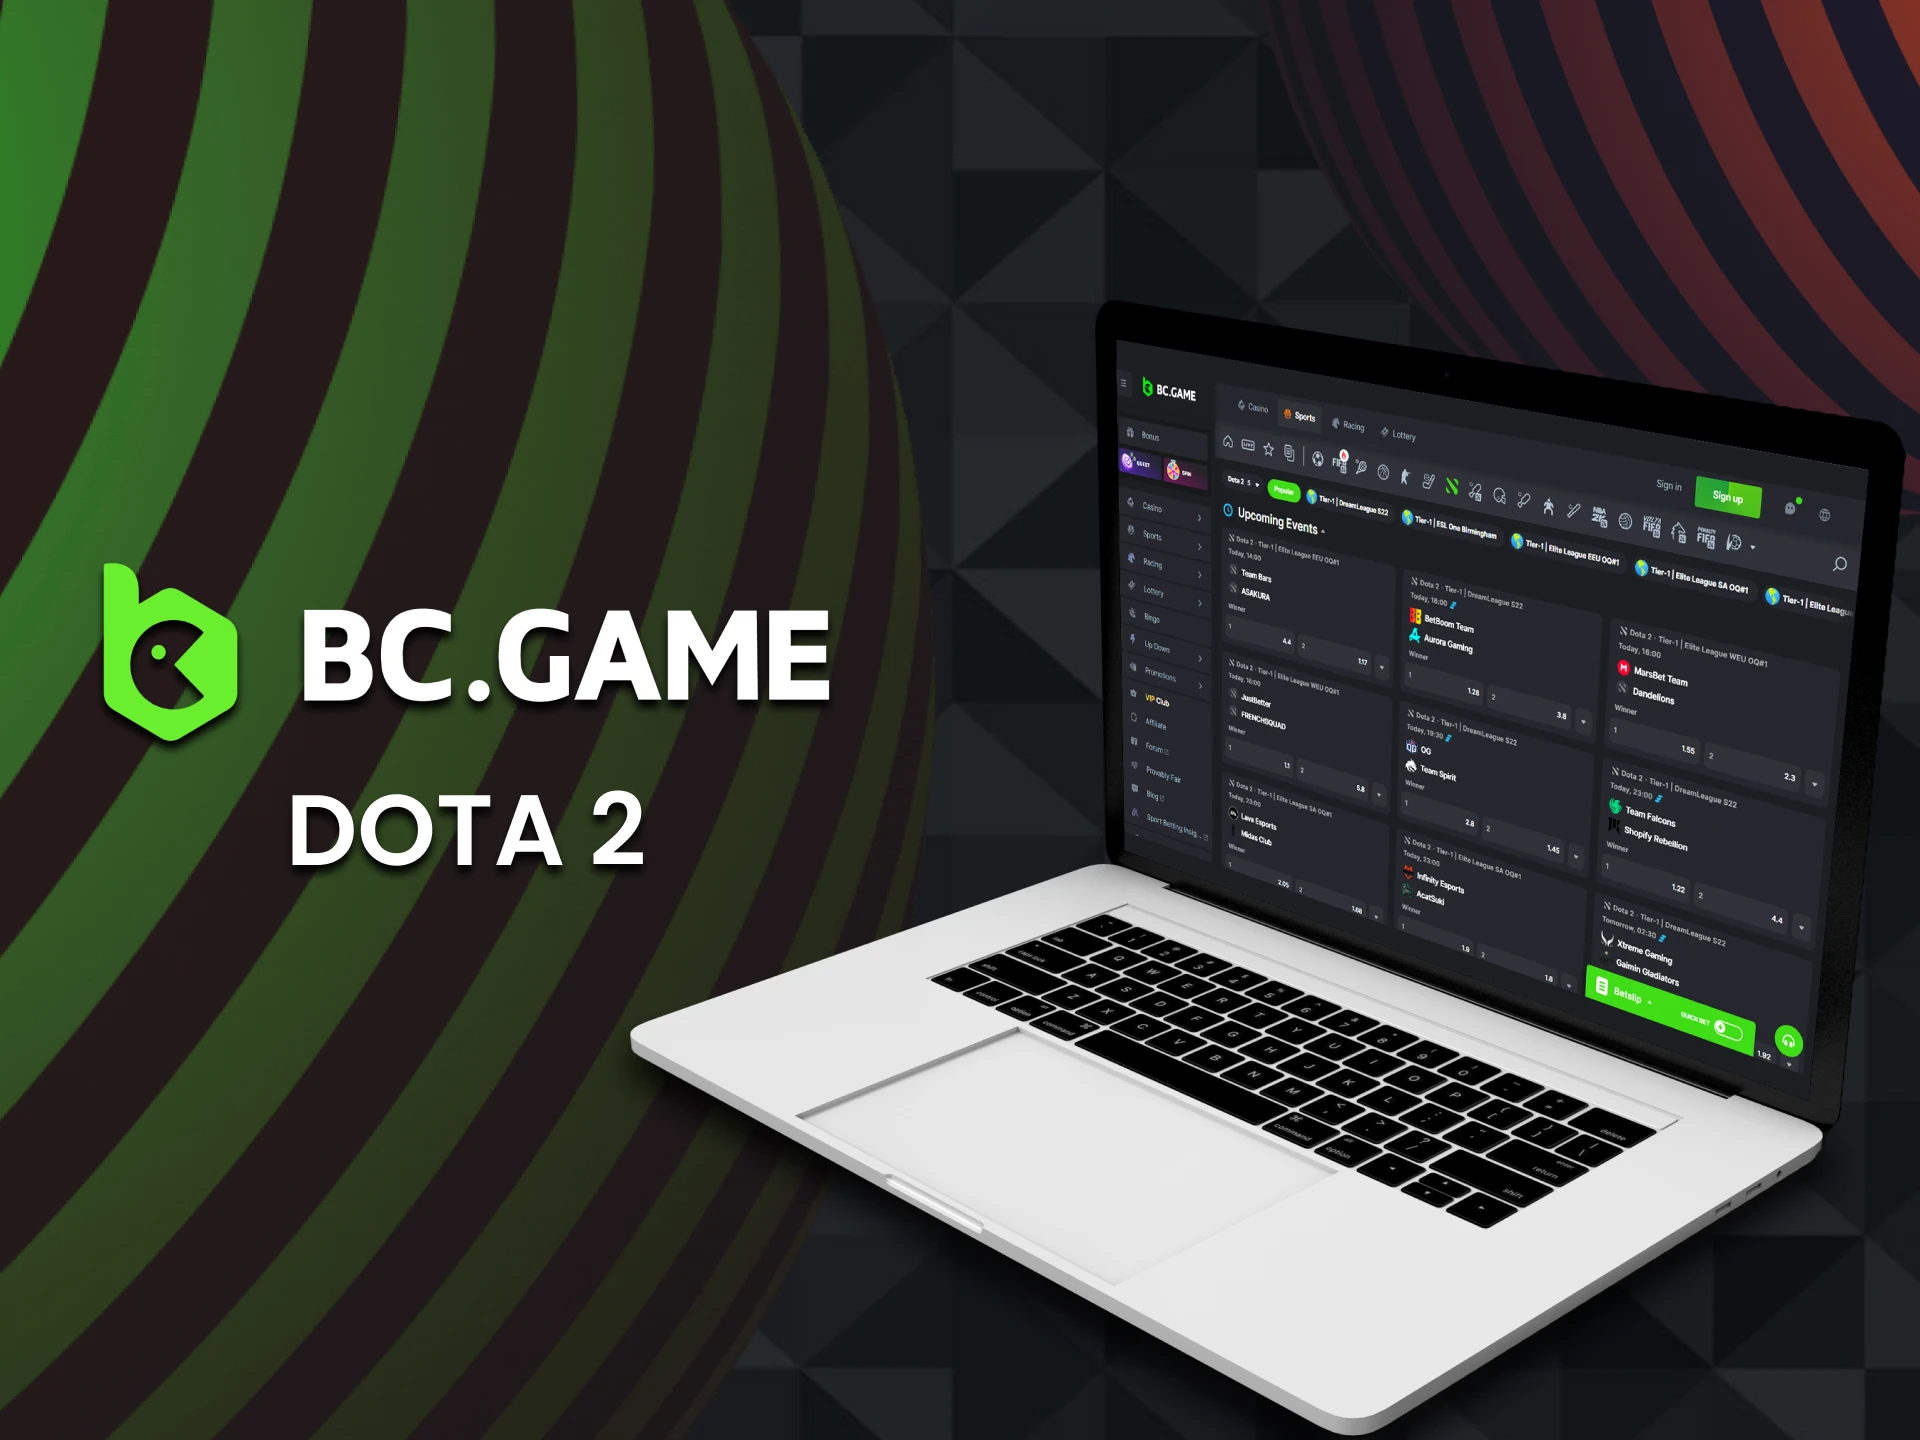 For eSports betting from BC Game, choose Dota 2.